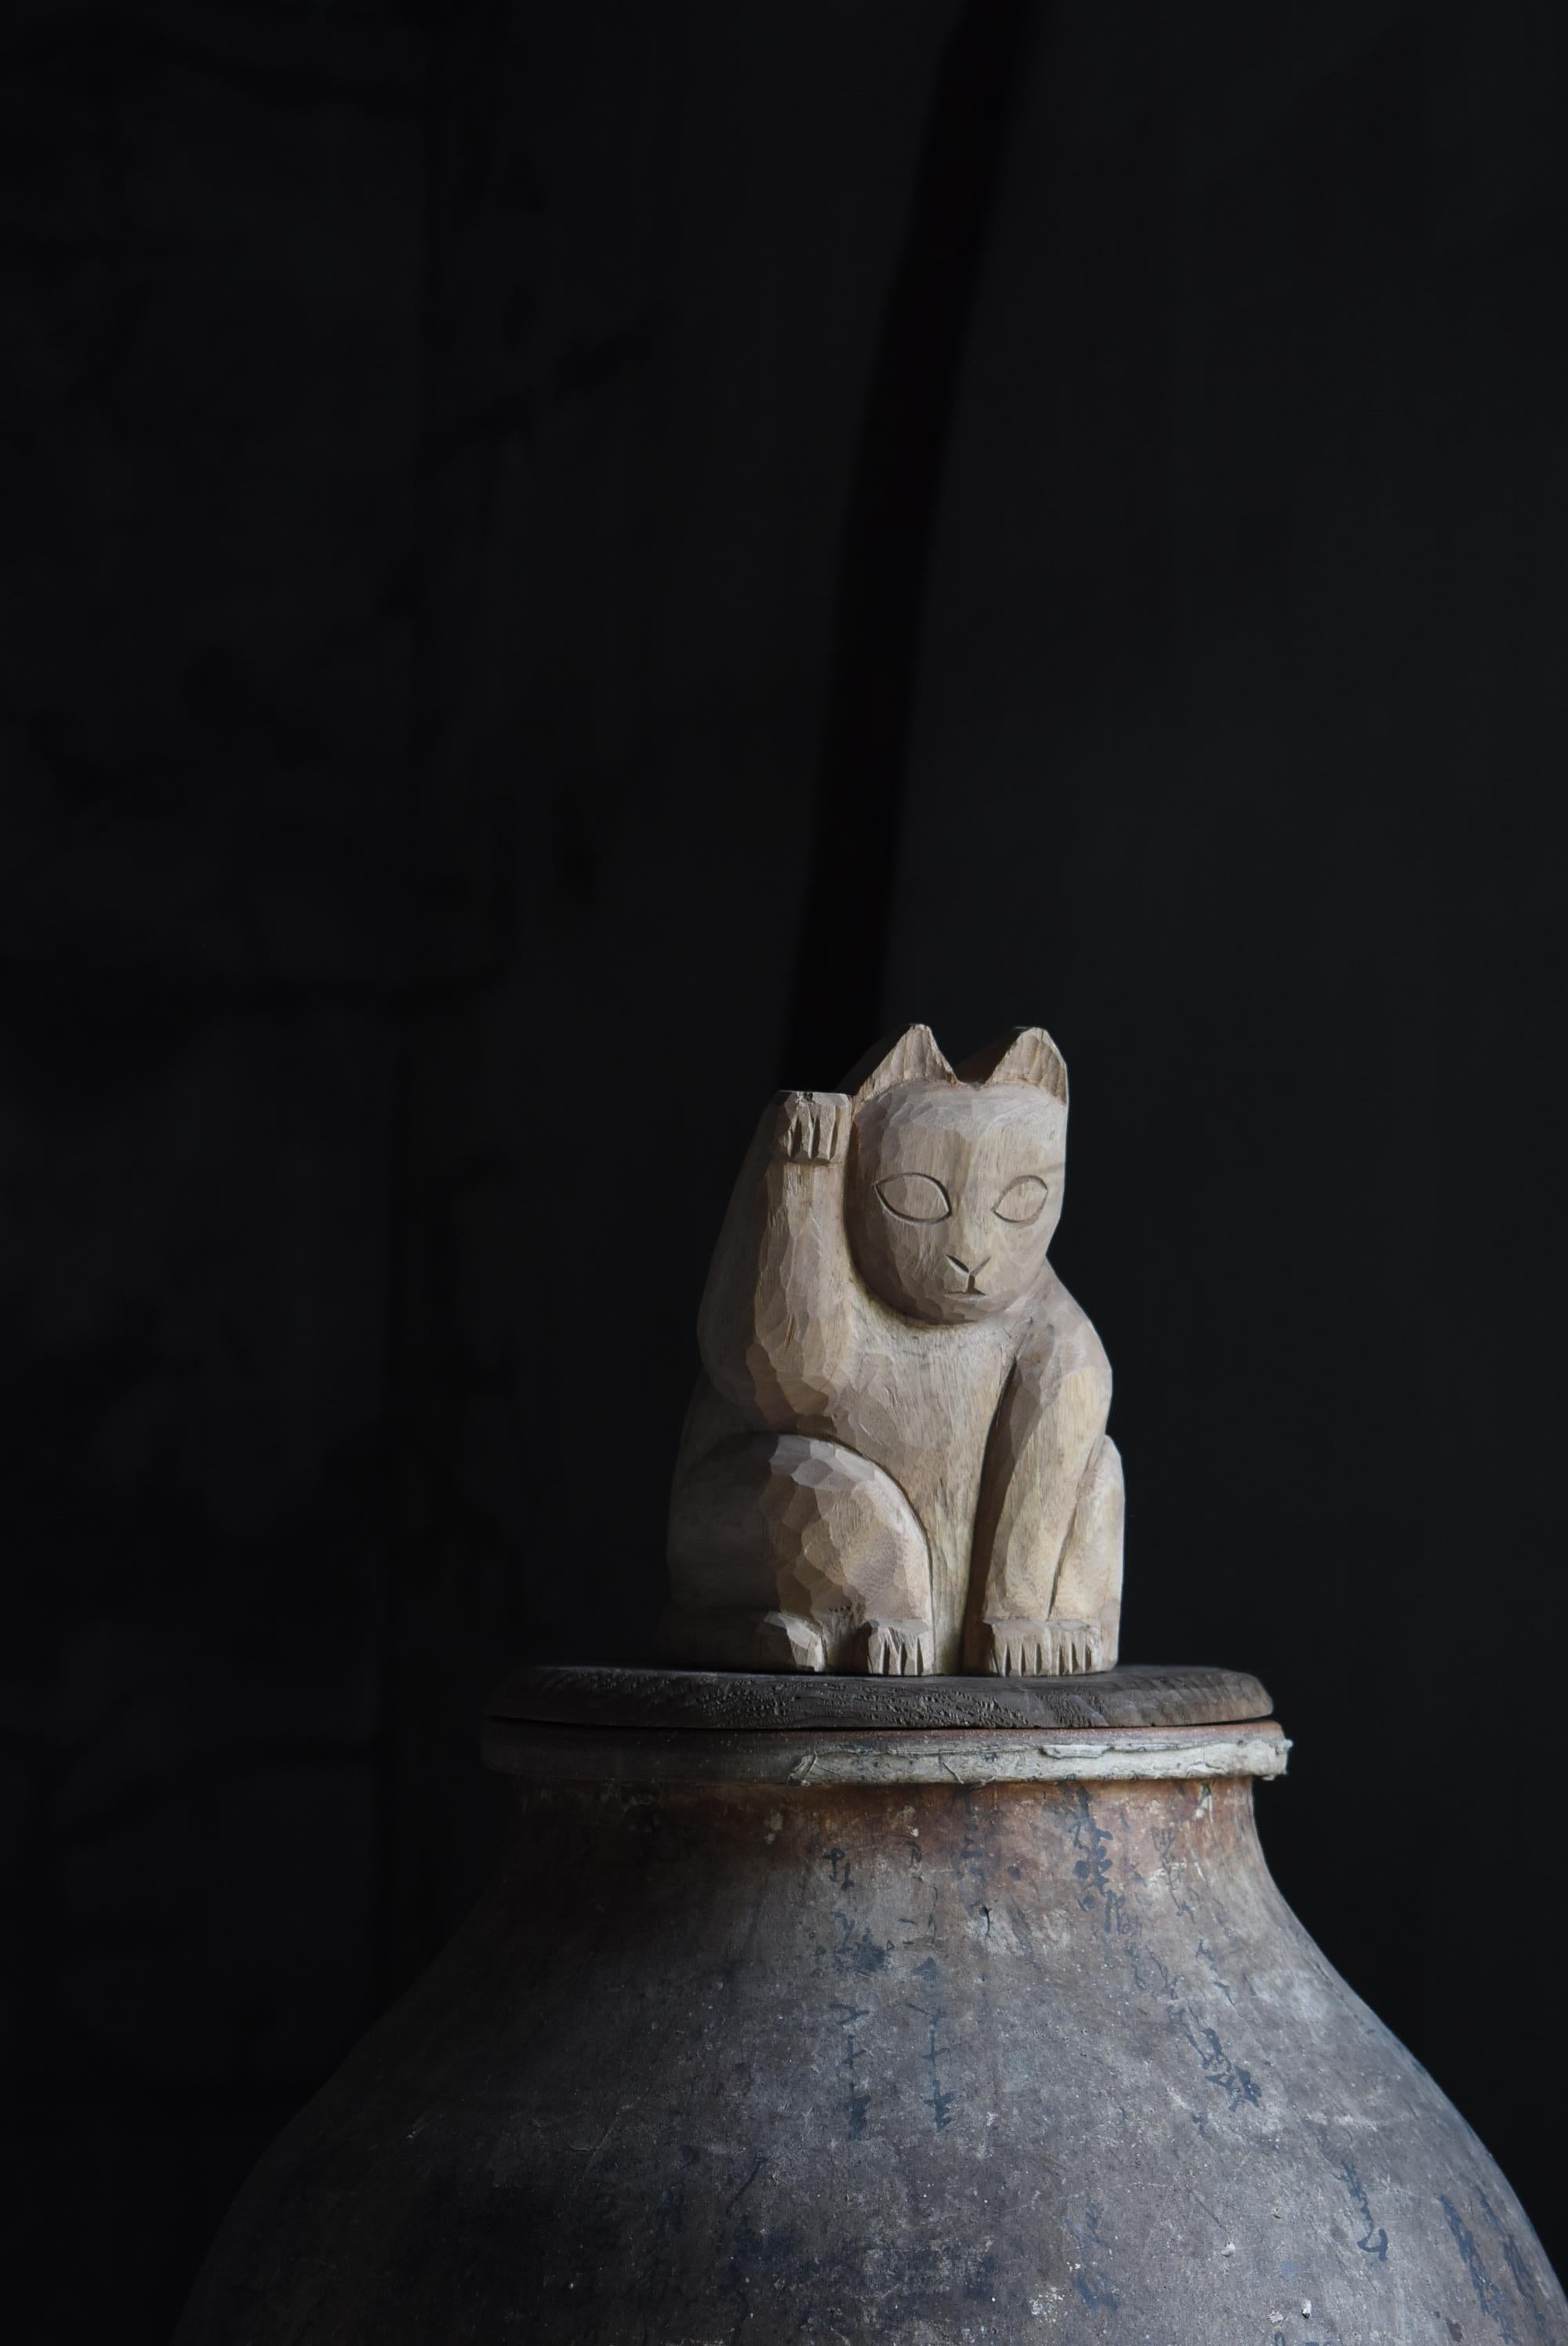 It is a Japanese old wood carving beckoning cat.
It is an item from 1940s to 1970s.

In Japan, it has long been familiar as a lucky charm of 